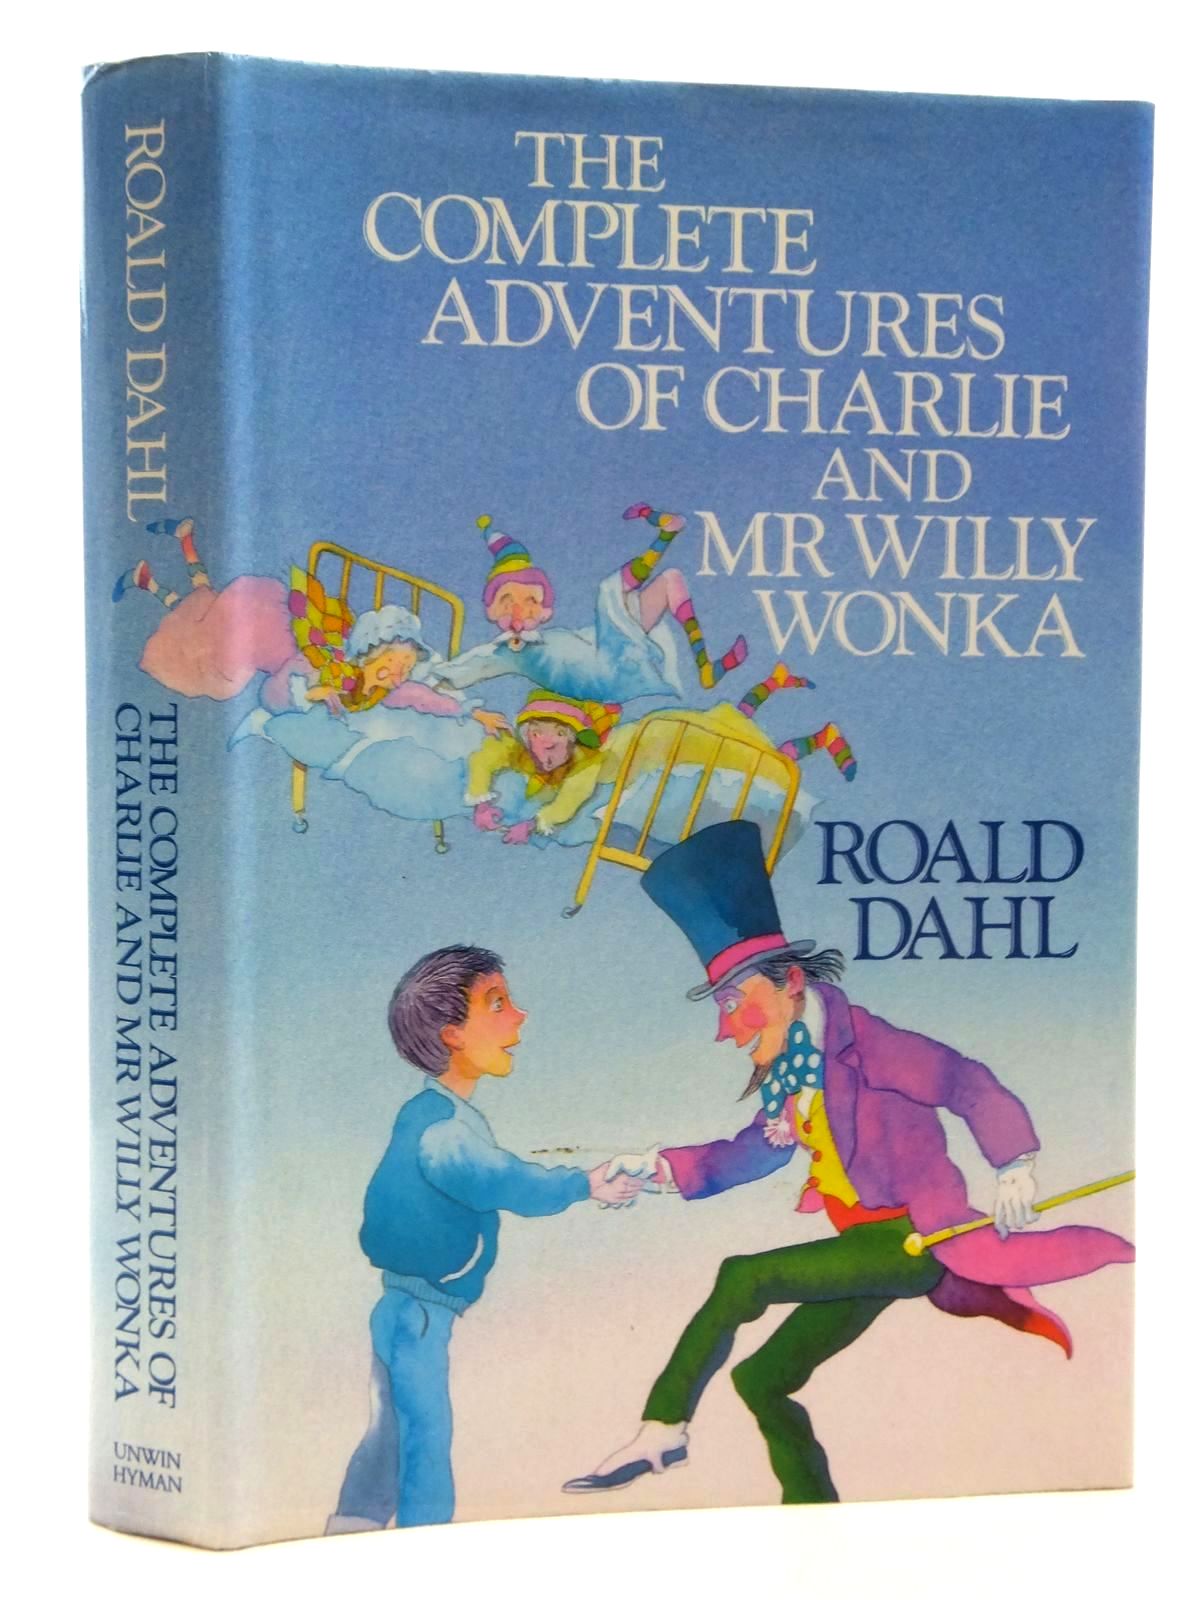 Stella & Rose's Books : THE COMPLETE ADVENTURES OF CHARLIE AND MR WILLY  WONKA Written By Roald Dahl, STOCK CODE: 2123727